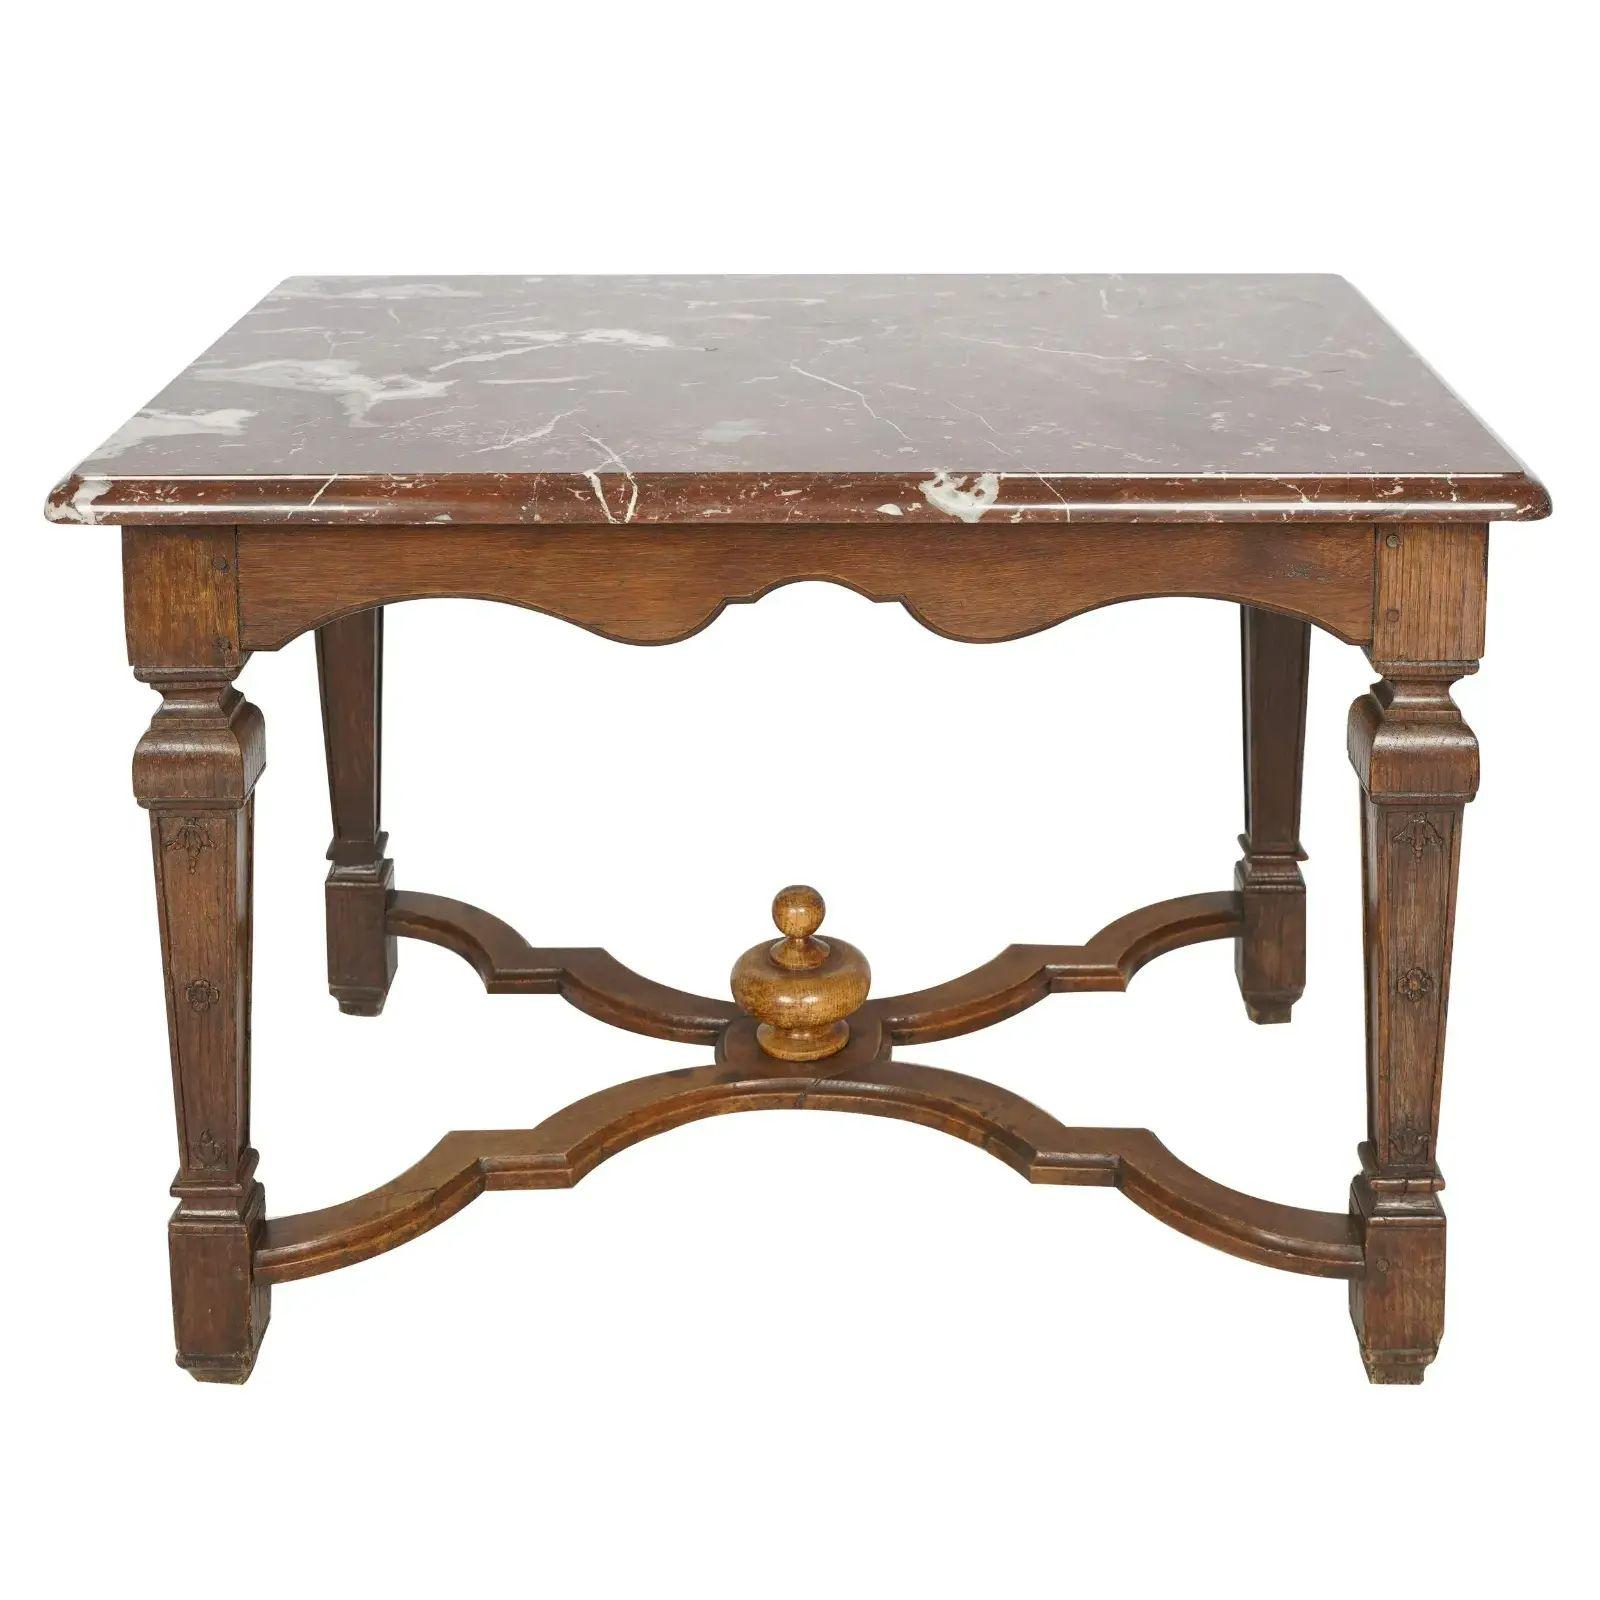 Antique Regence Style Oak & Marble Table, Early 19 Century For Sale 2